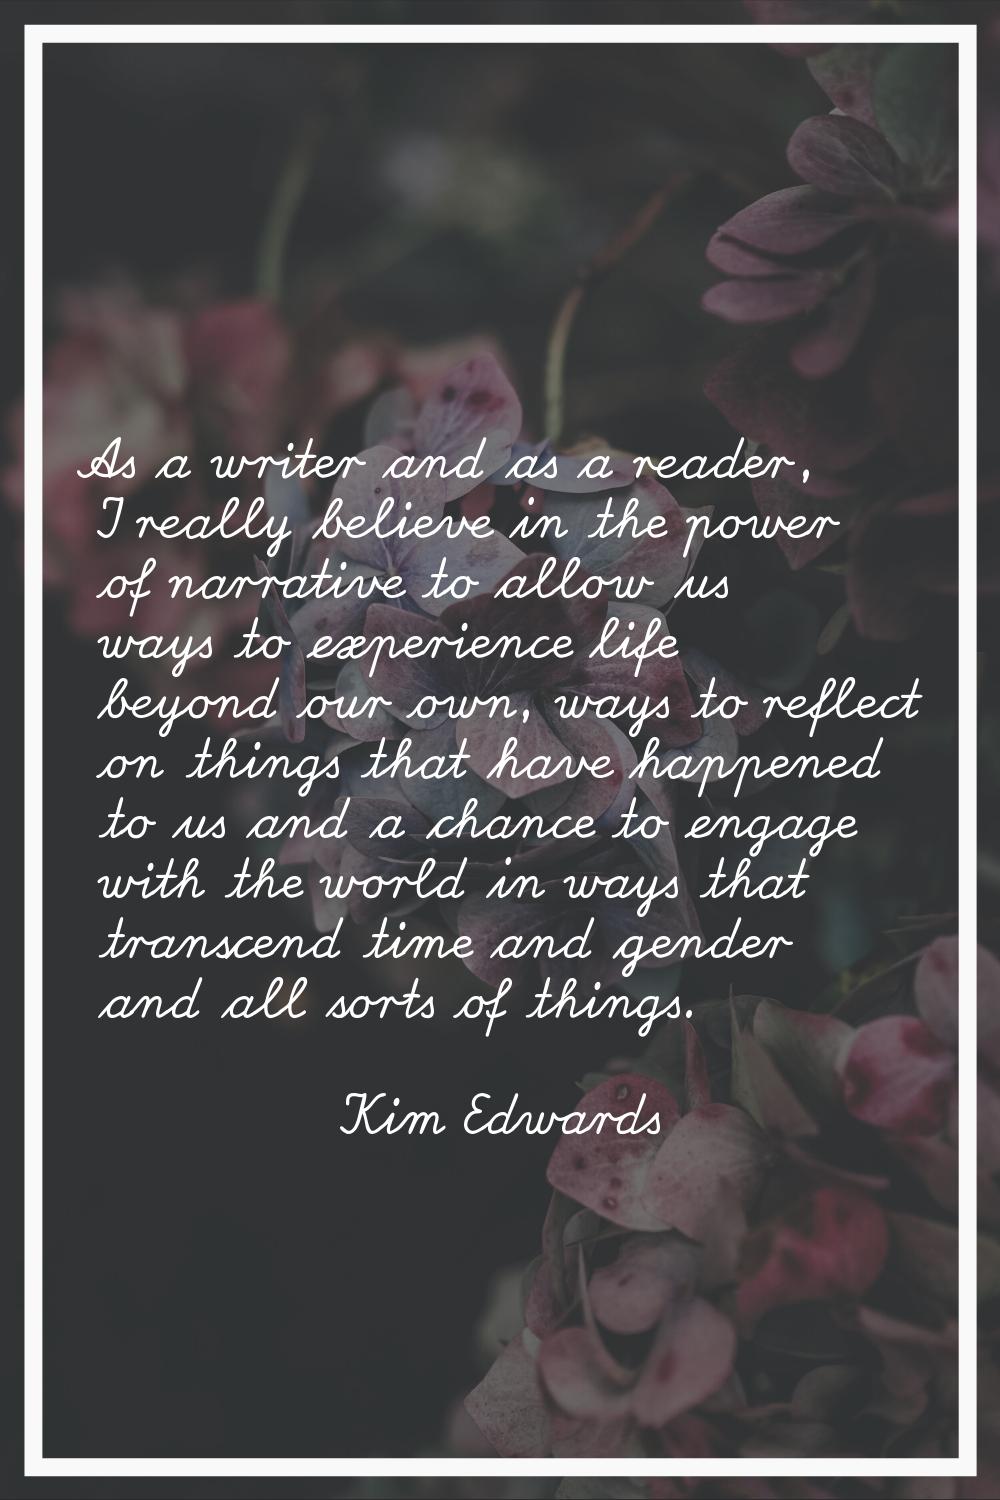 As a writer and as a reader, I really believe in the power of narrative to allow us ways to experie